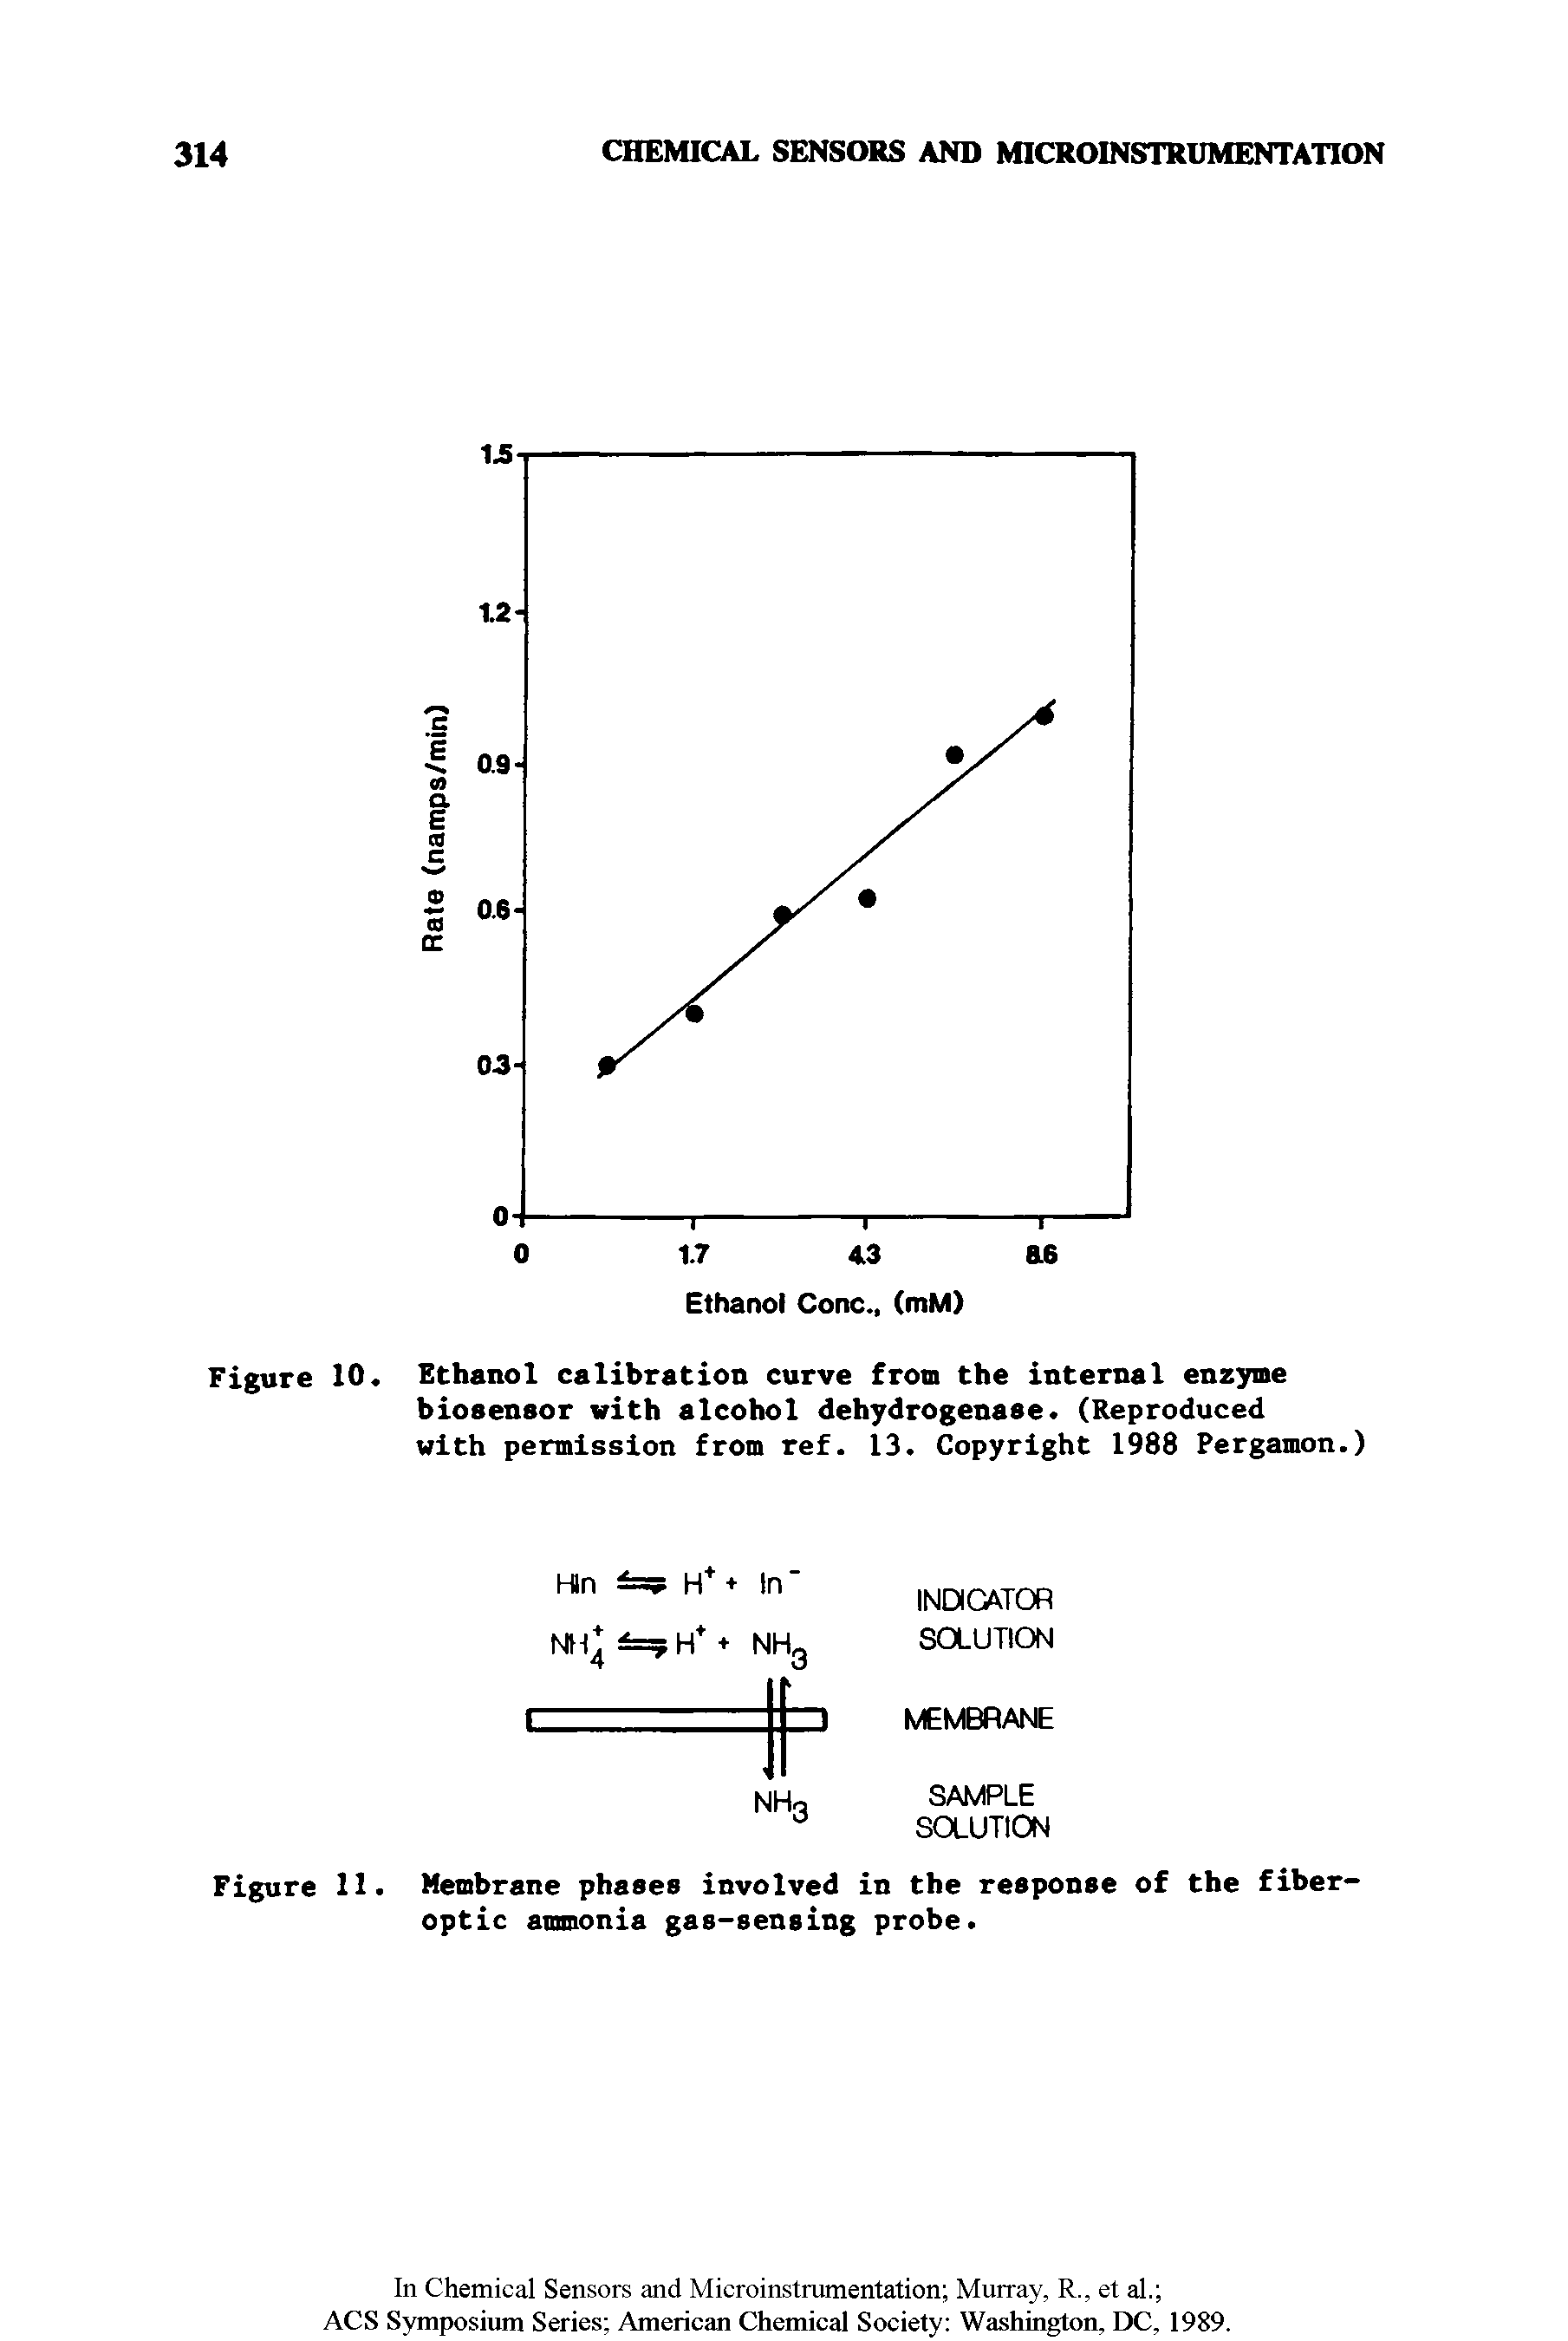 Figure 10. Ethanol calibration curve from the internal enzyme biosensor with alcohol dehydrogenase. (Reproduced with permission from ref. 13. Copyright 1988 Pergamon.)...